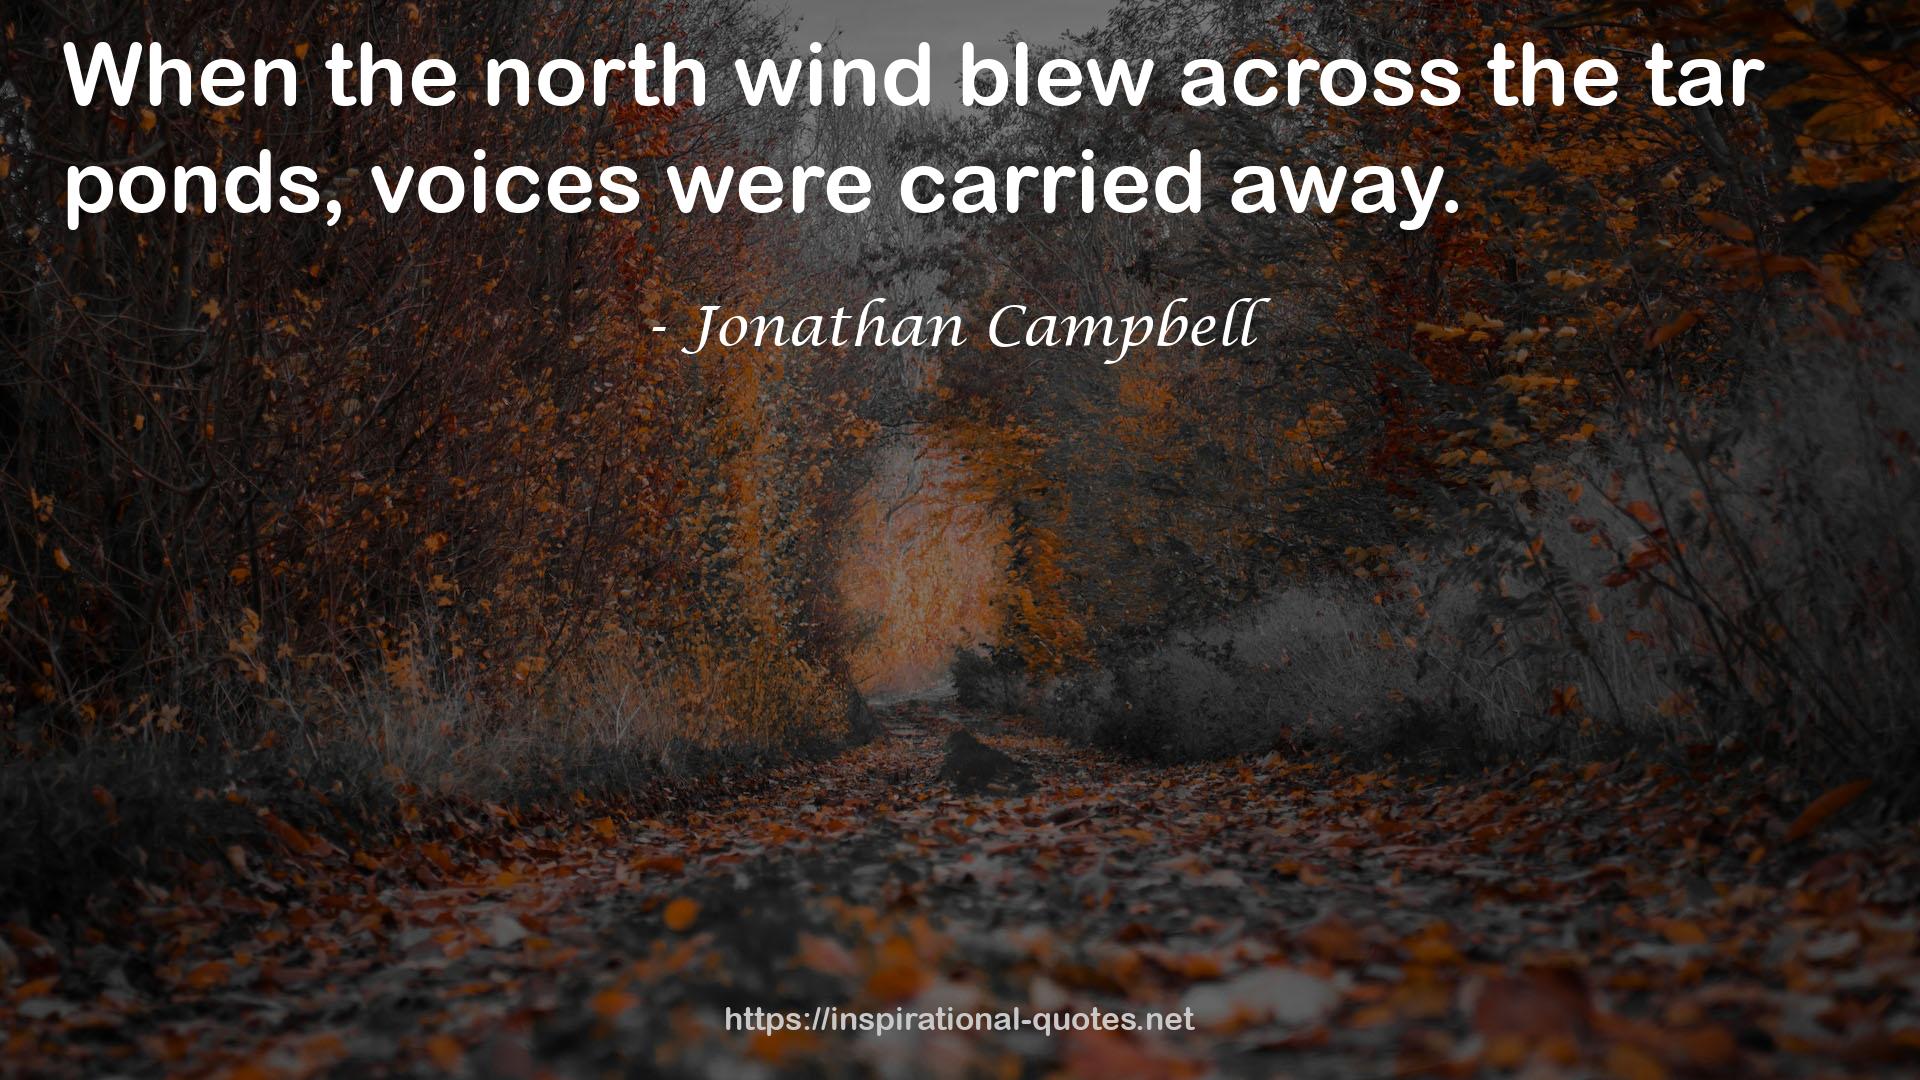 Jonathan Campbell QUOTES